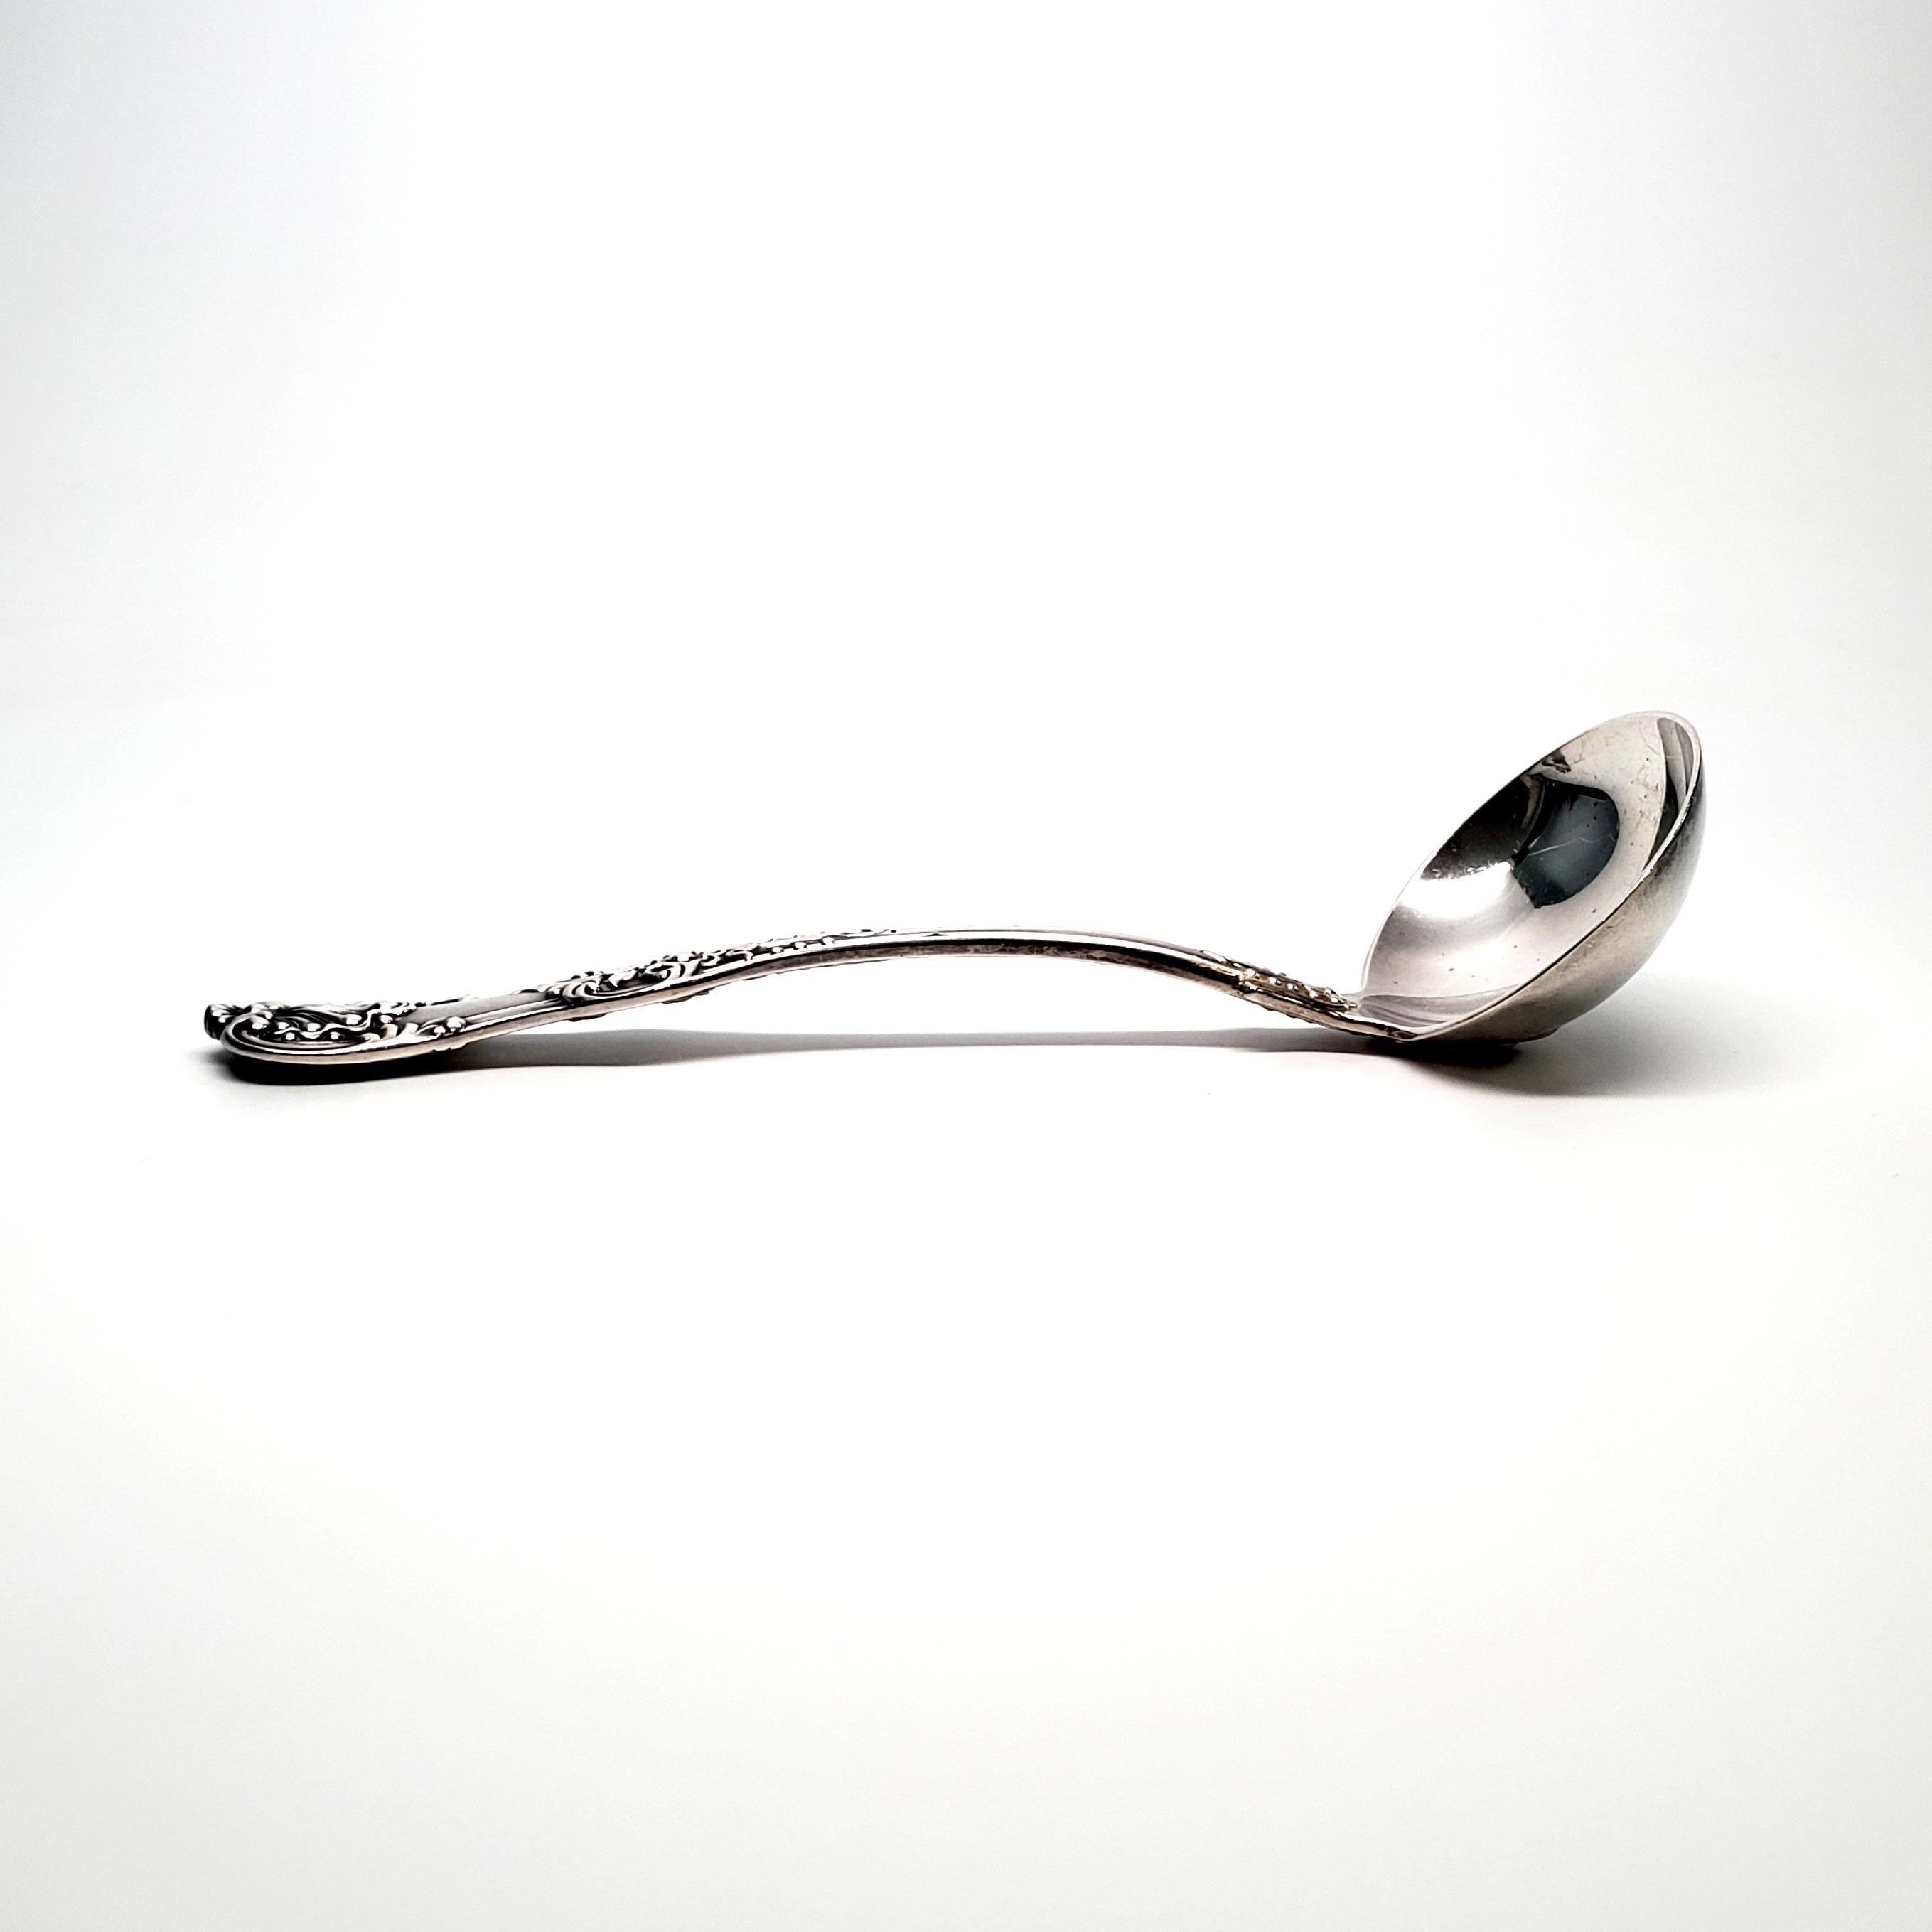 Sterling silver gravy ladle by Tiffany & Co in the English King pattern.

The English King pattern is heavy and ornate, featuring a scalloped tip and scrolled edge. Introduced in 1885, the pattern is still being produced today. No